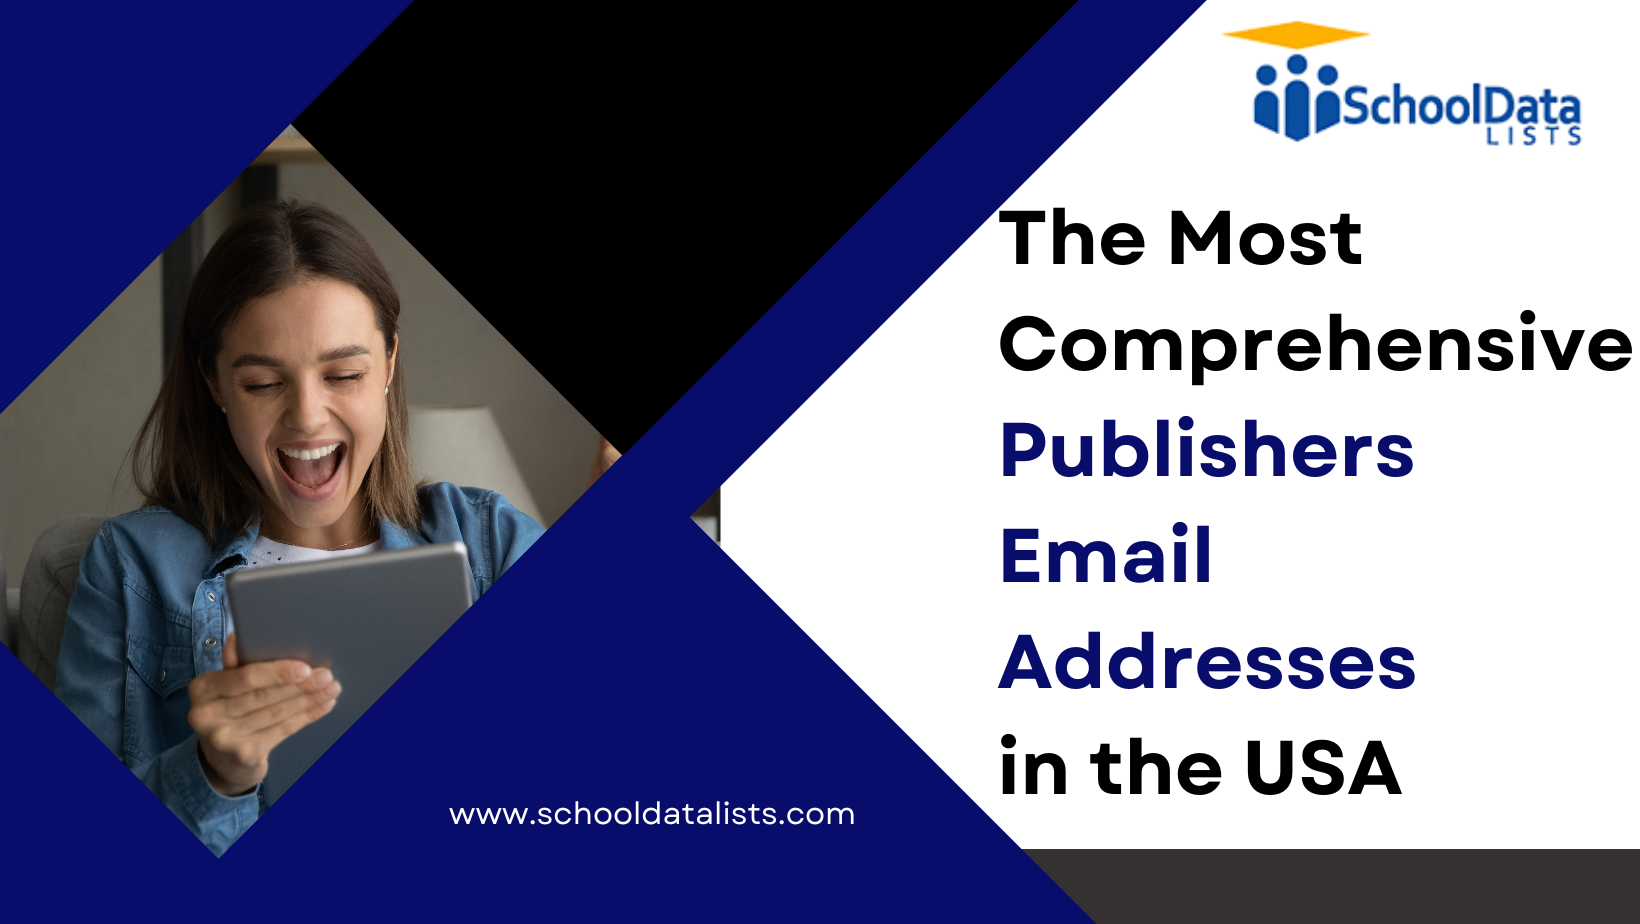 The Most Comprehensive Publishers Email Addresses in the USA